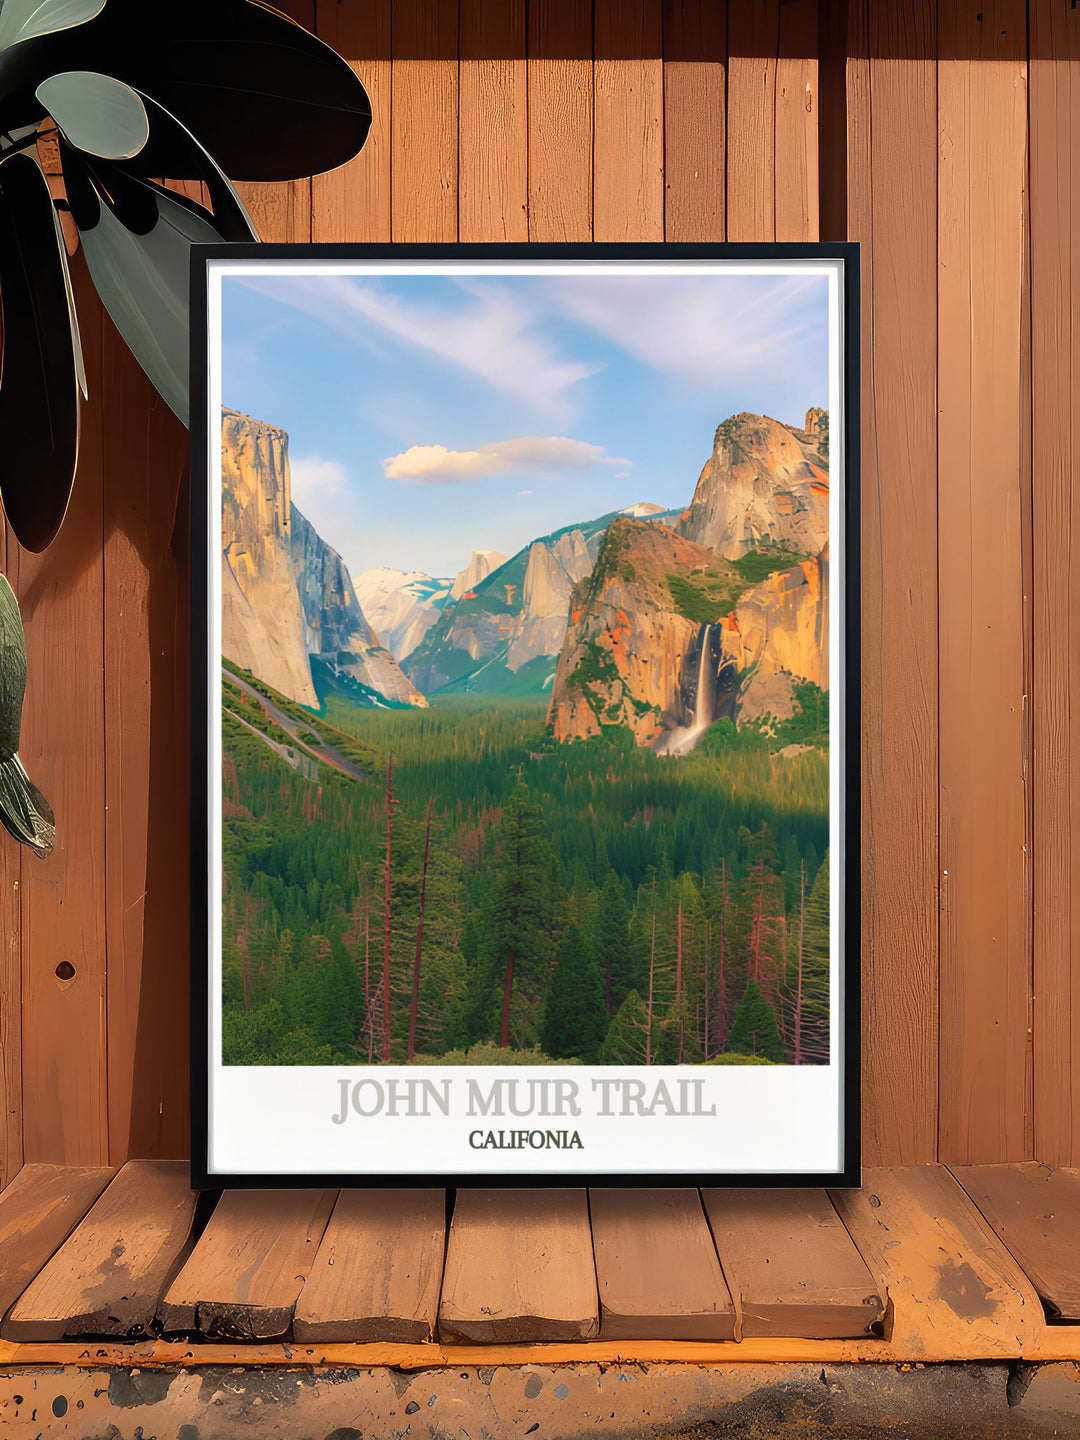 Highlighting the stunning landscapes of Yosemite Valley, this travel poster features its dramatic peaks and clear skies. Perfect for those who appreciate vibrant scenes and rugged beauty, this artwork captures the essence of the Sierra Nevada.